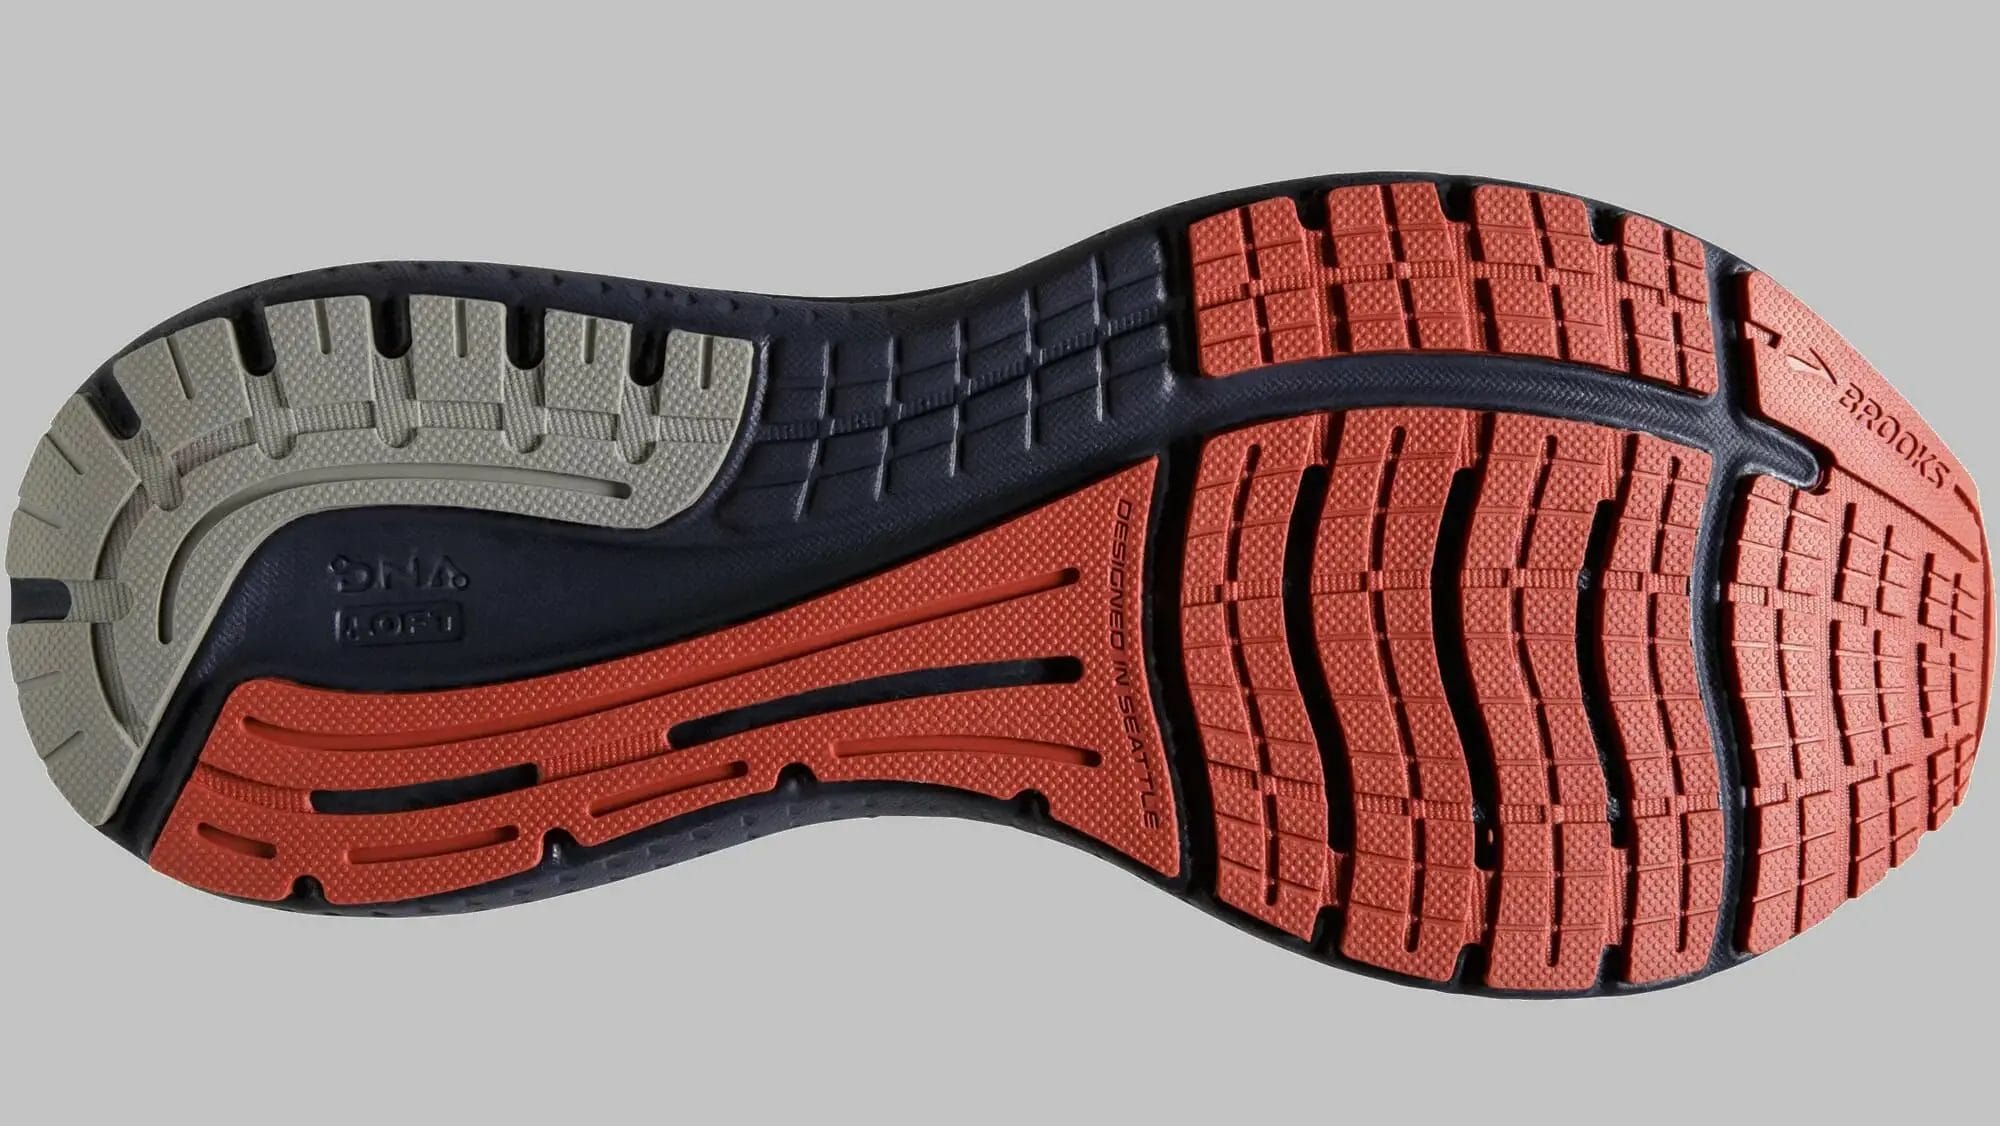 Close up view of the Flex Grooves on the outsole.